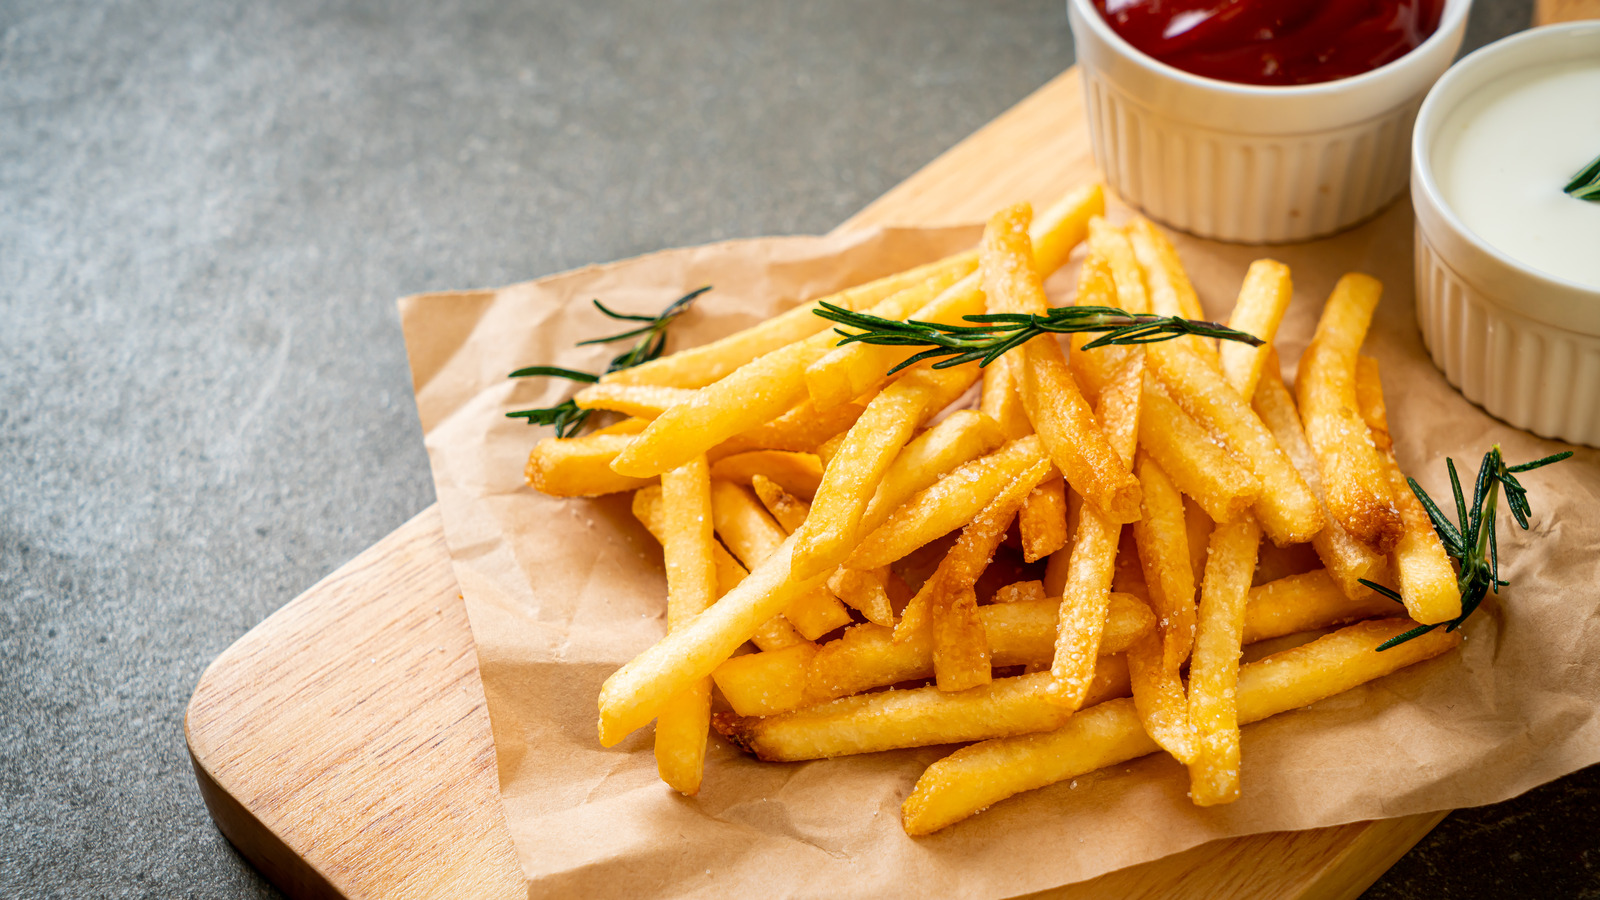 https://www.tastingtable.com/img/gallery/the-origin-of-french-fries-might-surprise-you/l-intro-1697912707.jpg